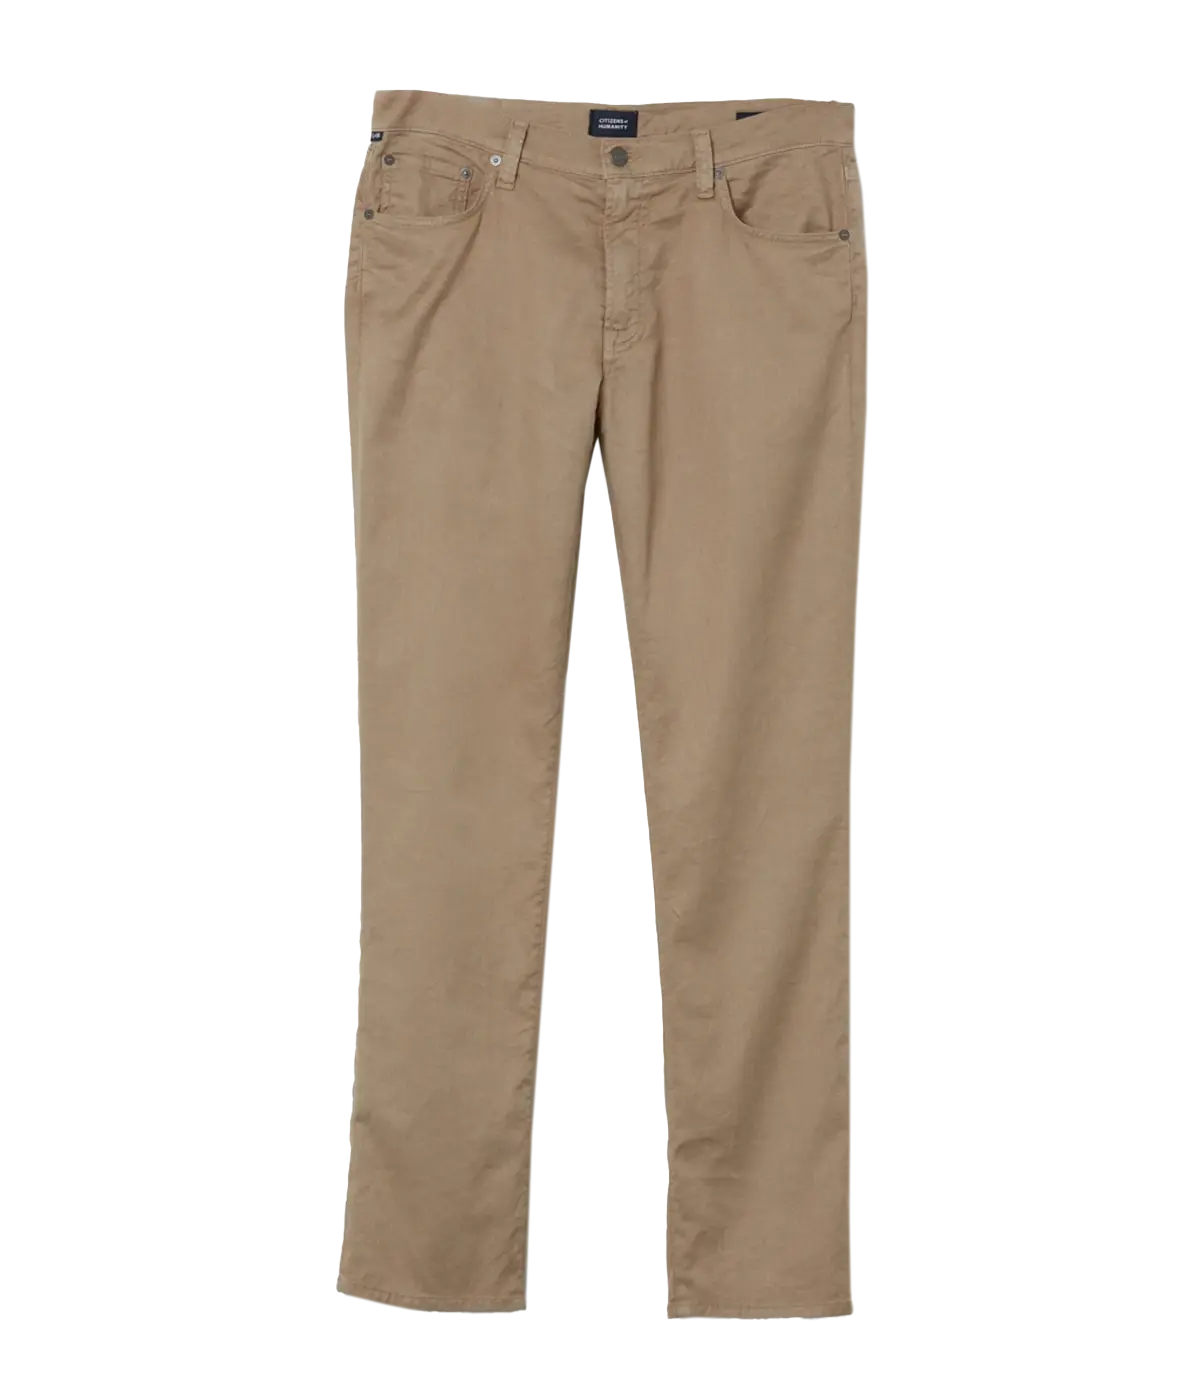 Neutral stretch linen pants by Citizens of Humanity. Perfect for summer, breathable and lightweight, great for athletic build. Wash and wear. 